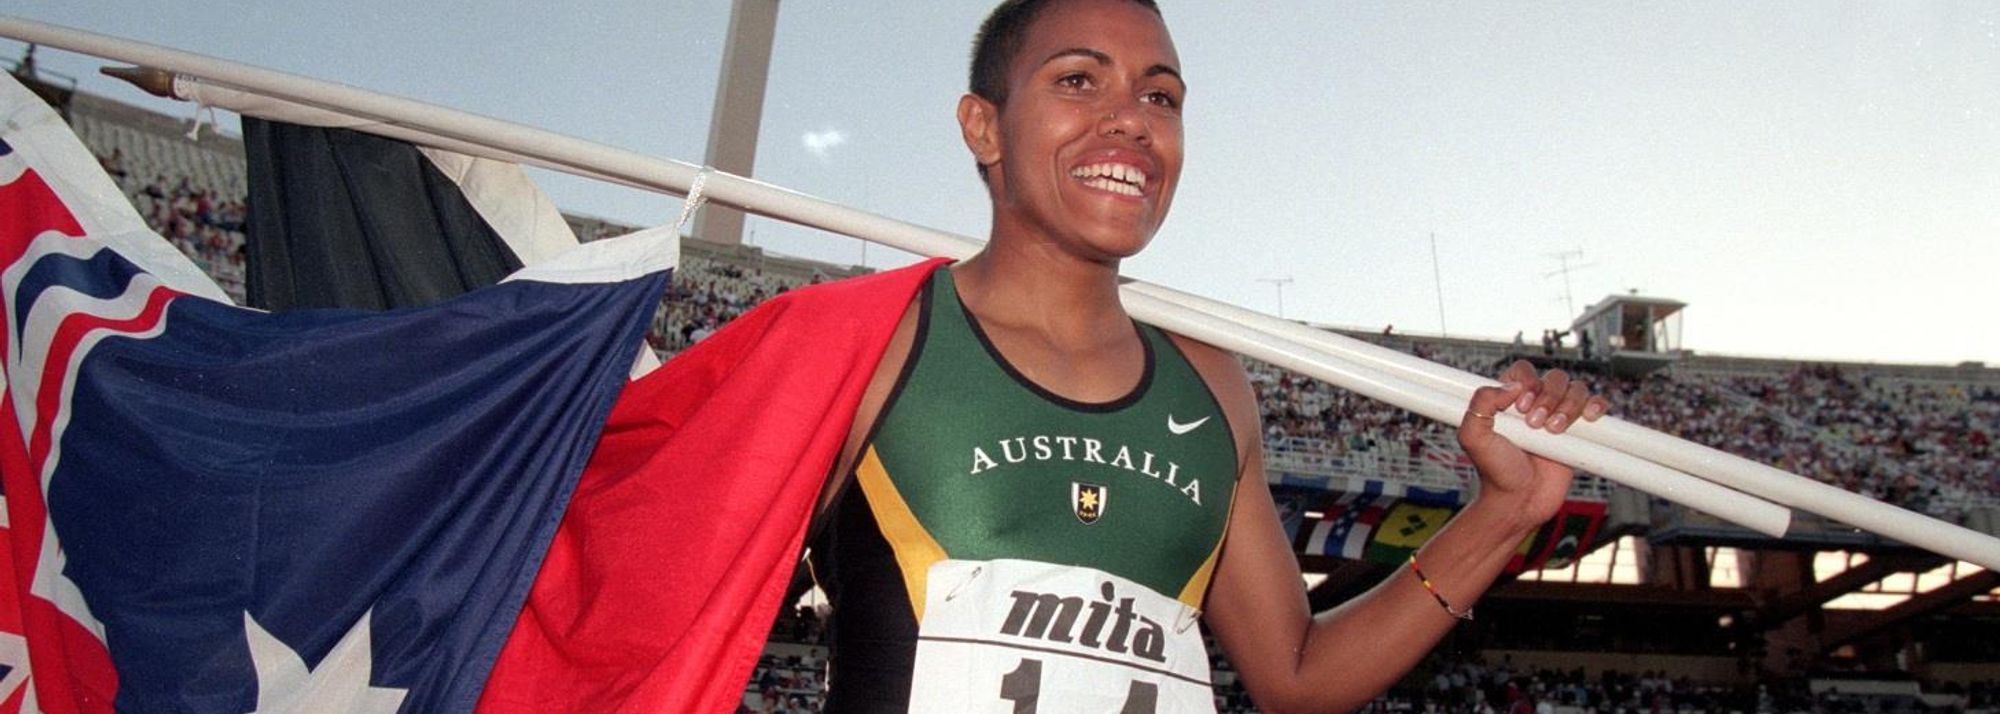 Cathy Freeman had a wonderful 1997 season and her World Championship gold medal represented the first ever won by an Australian Aboriginal. But, as LEN JOHNSON reports, although Freeman was born with sport in her blood, she has covered a lot of ground to get to the top